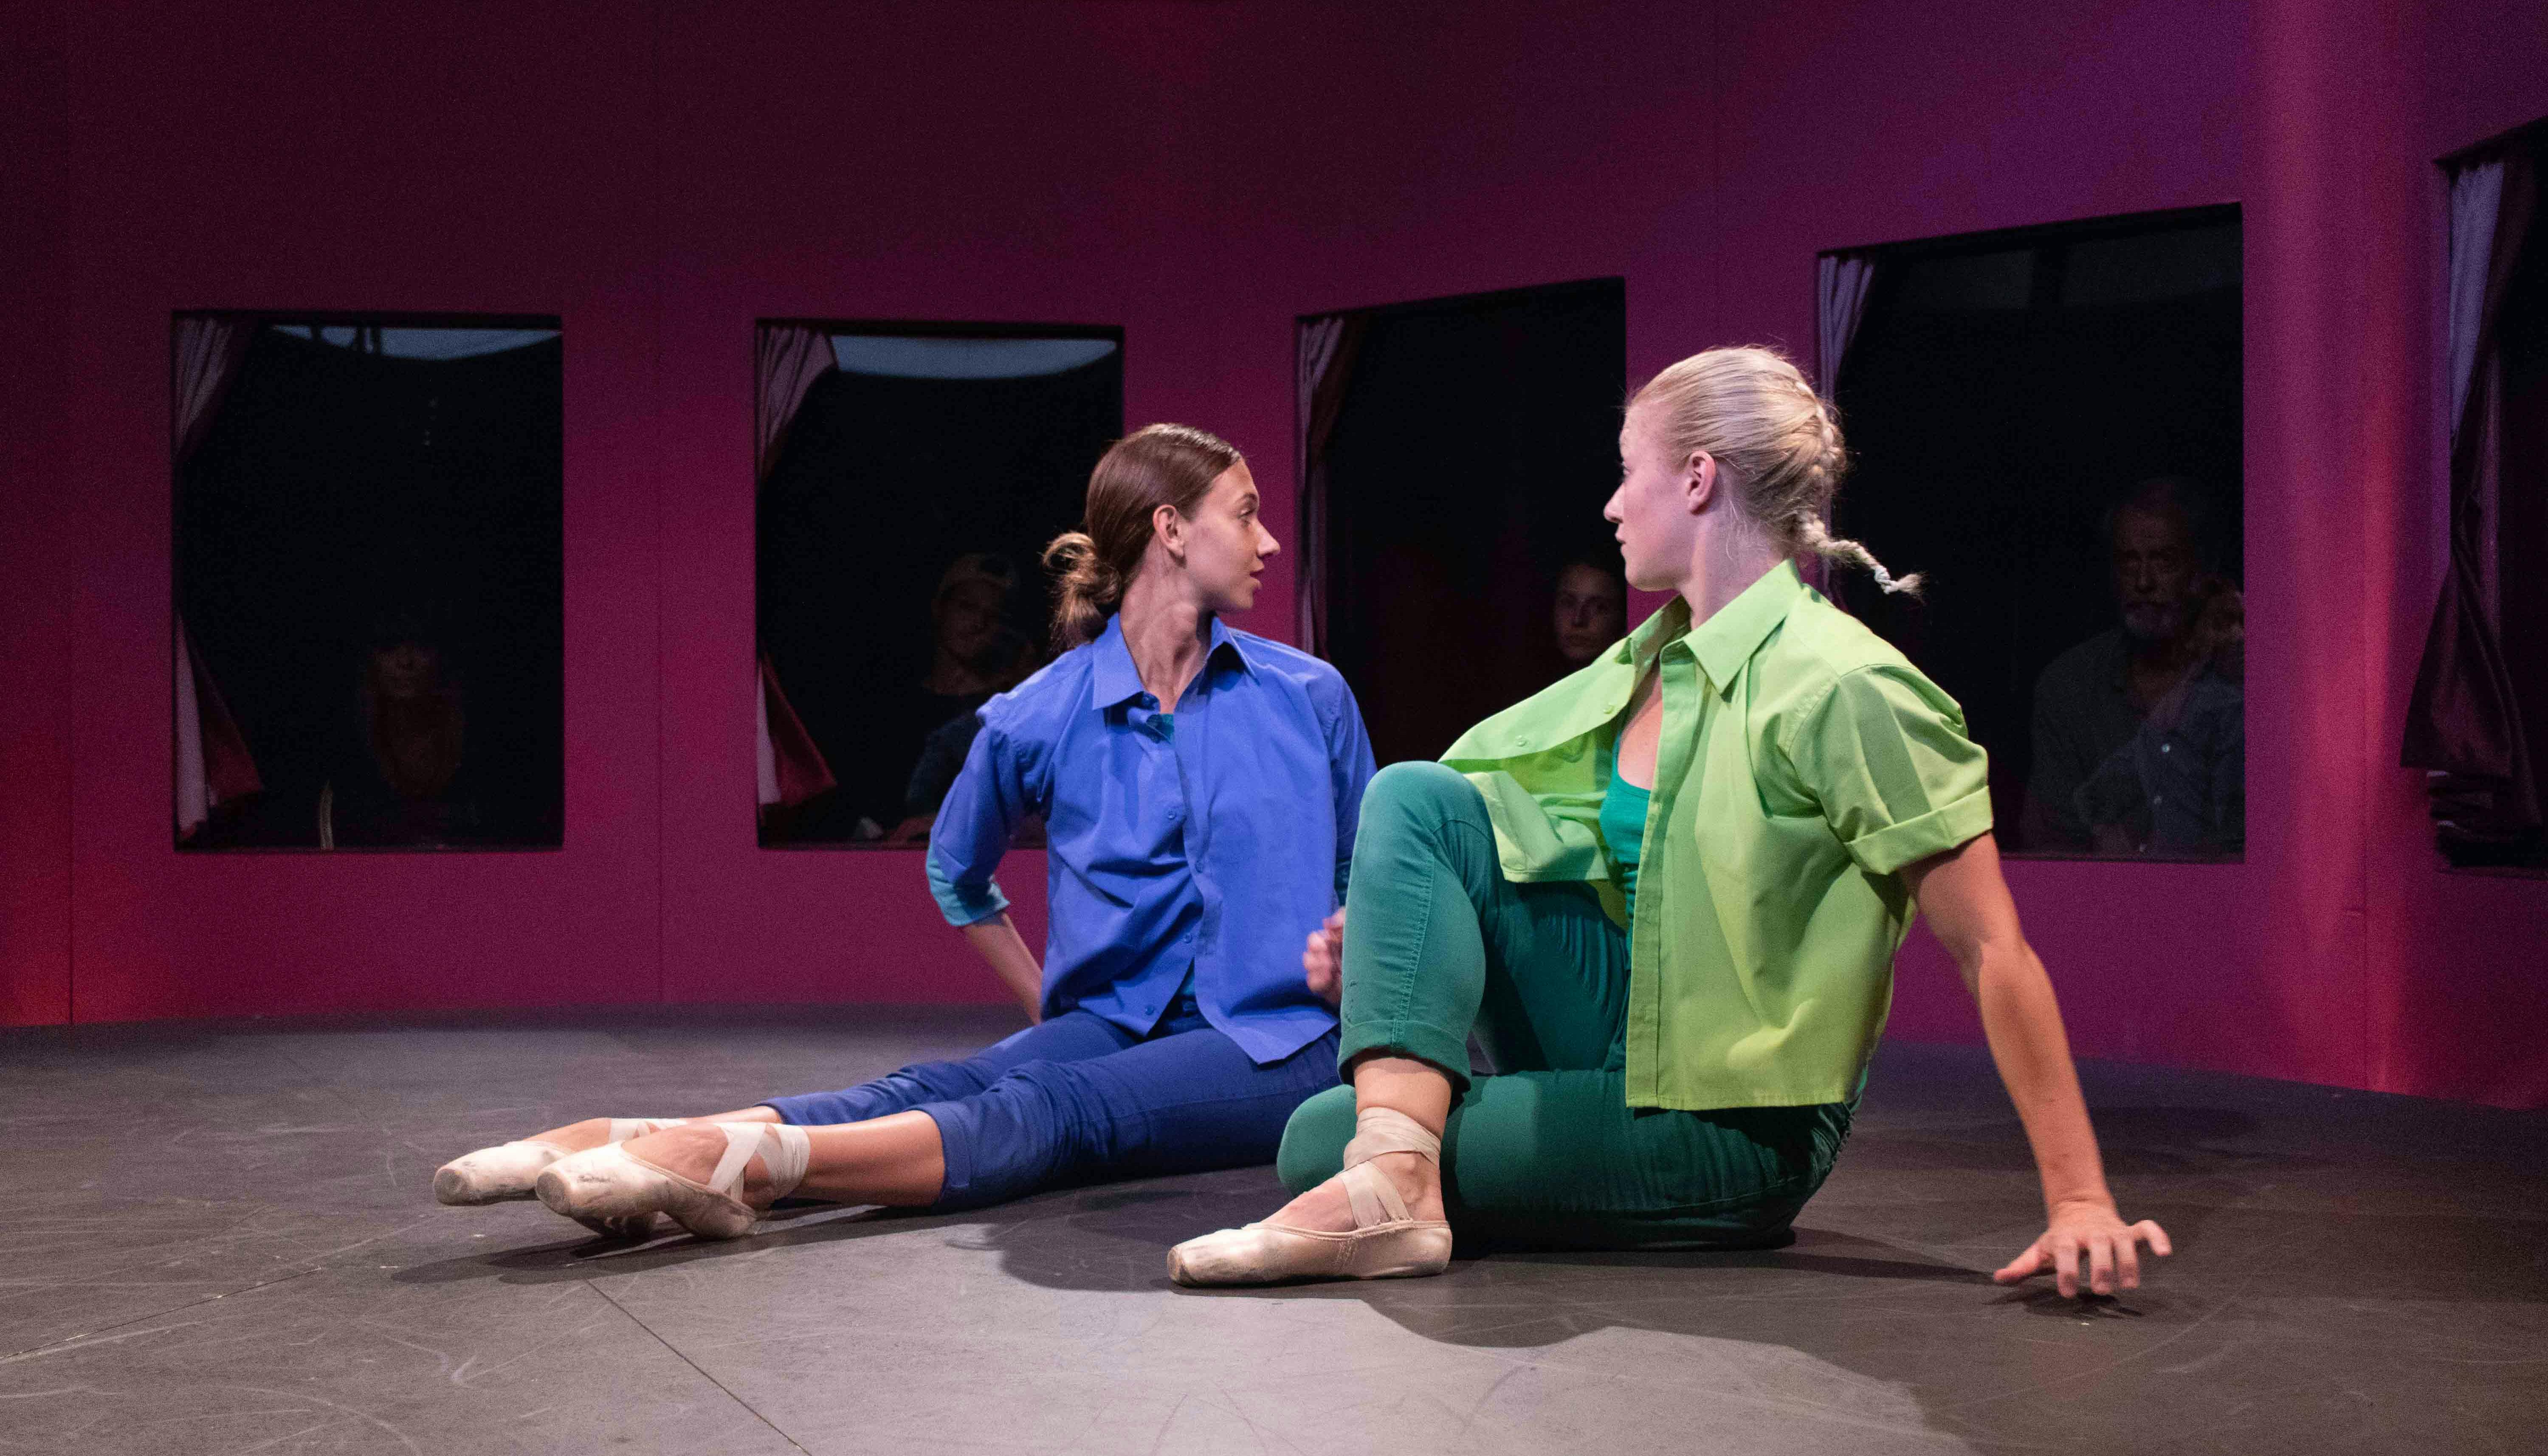 Two dancers are seated on the floor, twisting their torso backwards. One is dressed in blue, the other in green. They are wearing pointe shoes. Behind them, through a series of windows, some spectators watch.